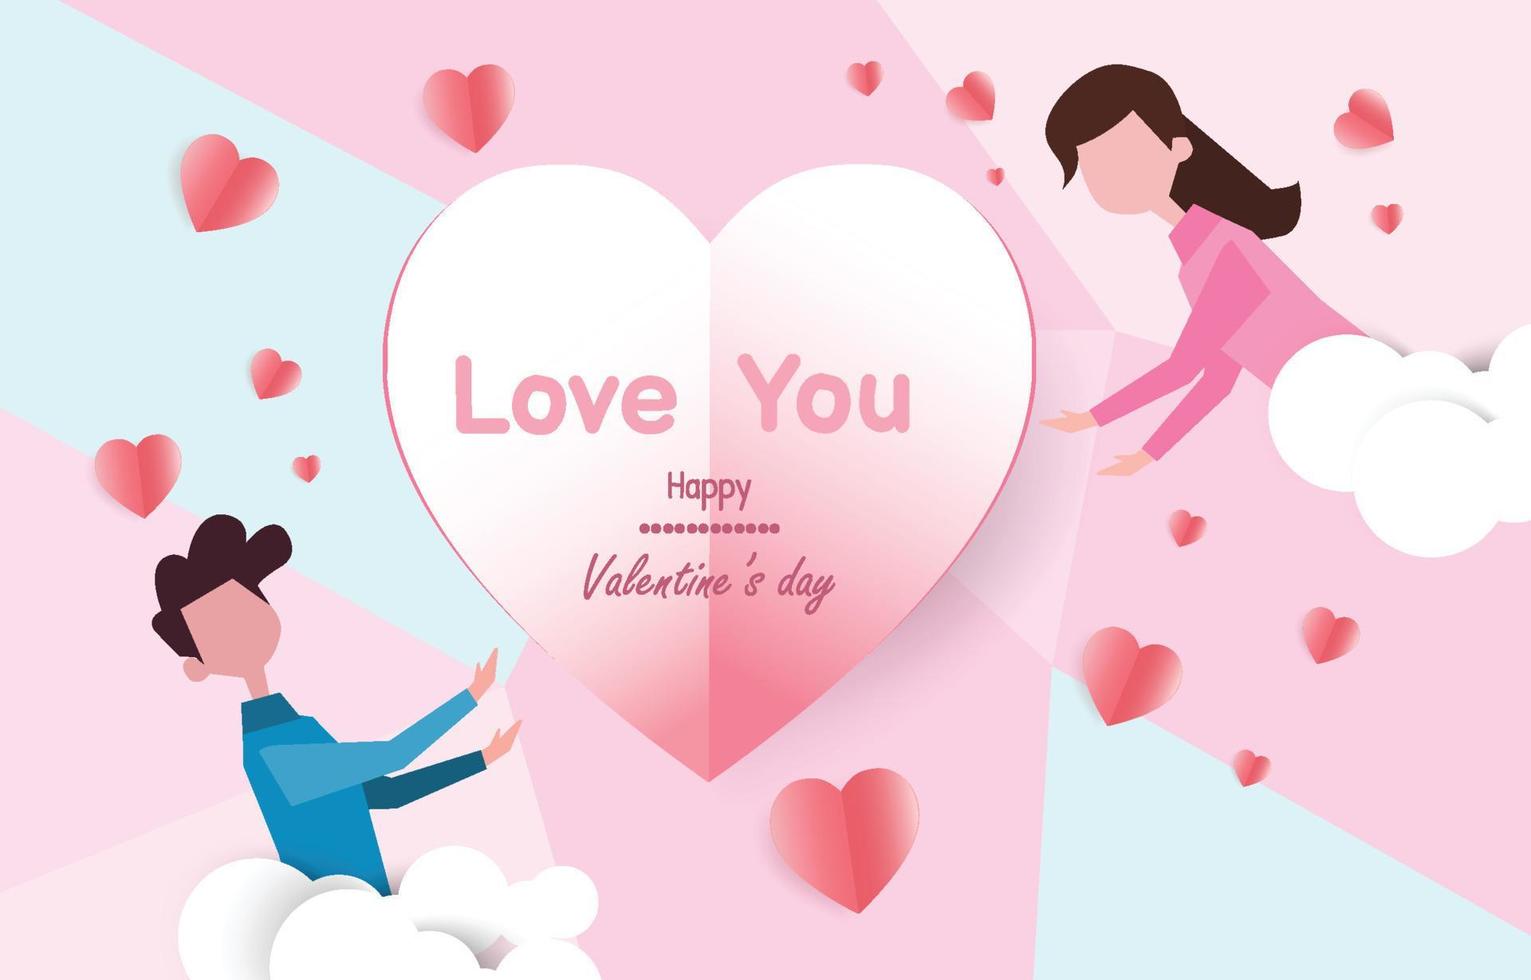 Paper cut elements in shape of young people and  haerts papercut background. Vector symbols of love for Happy Valentine's Day,  greeting card design.